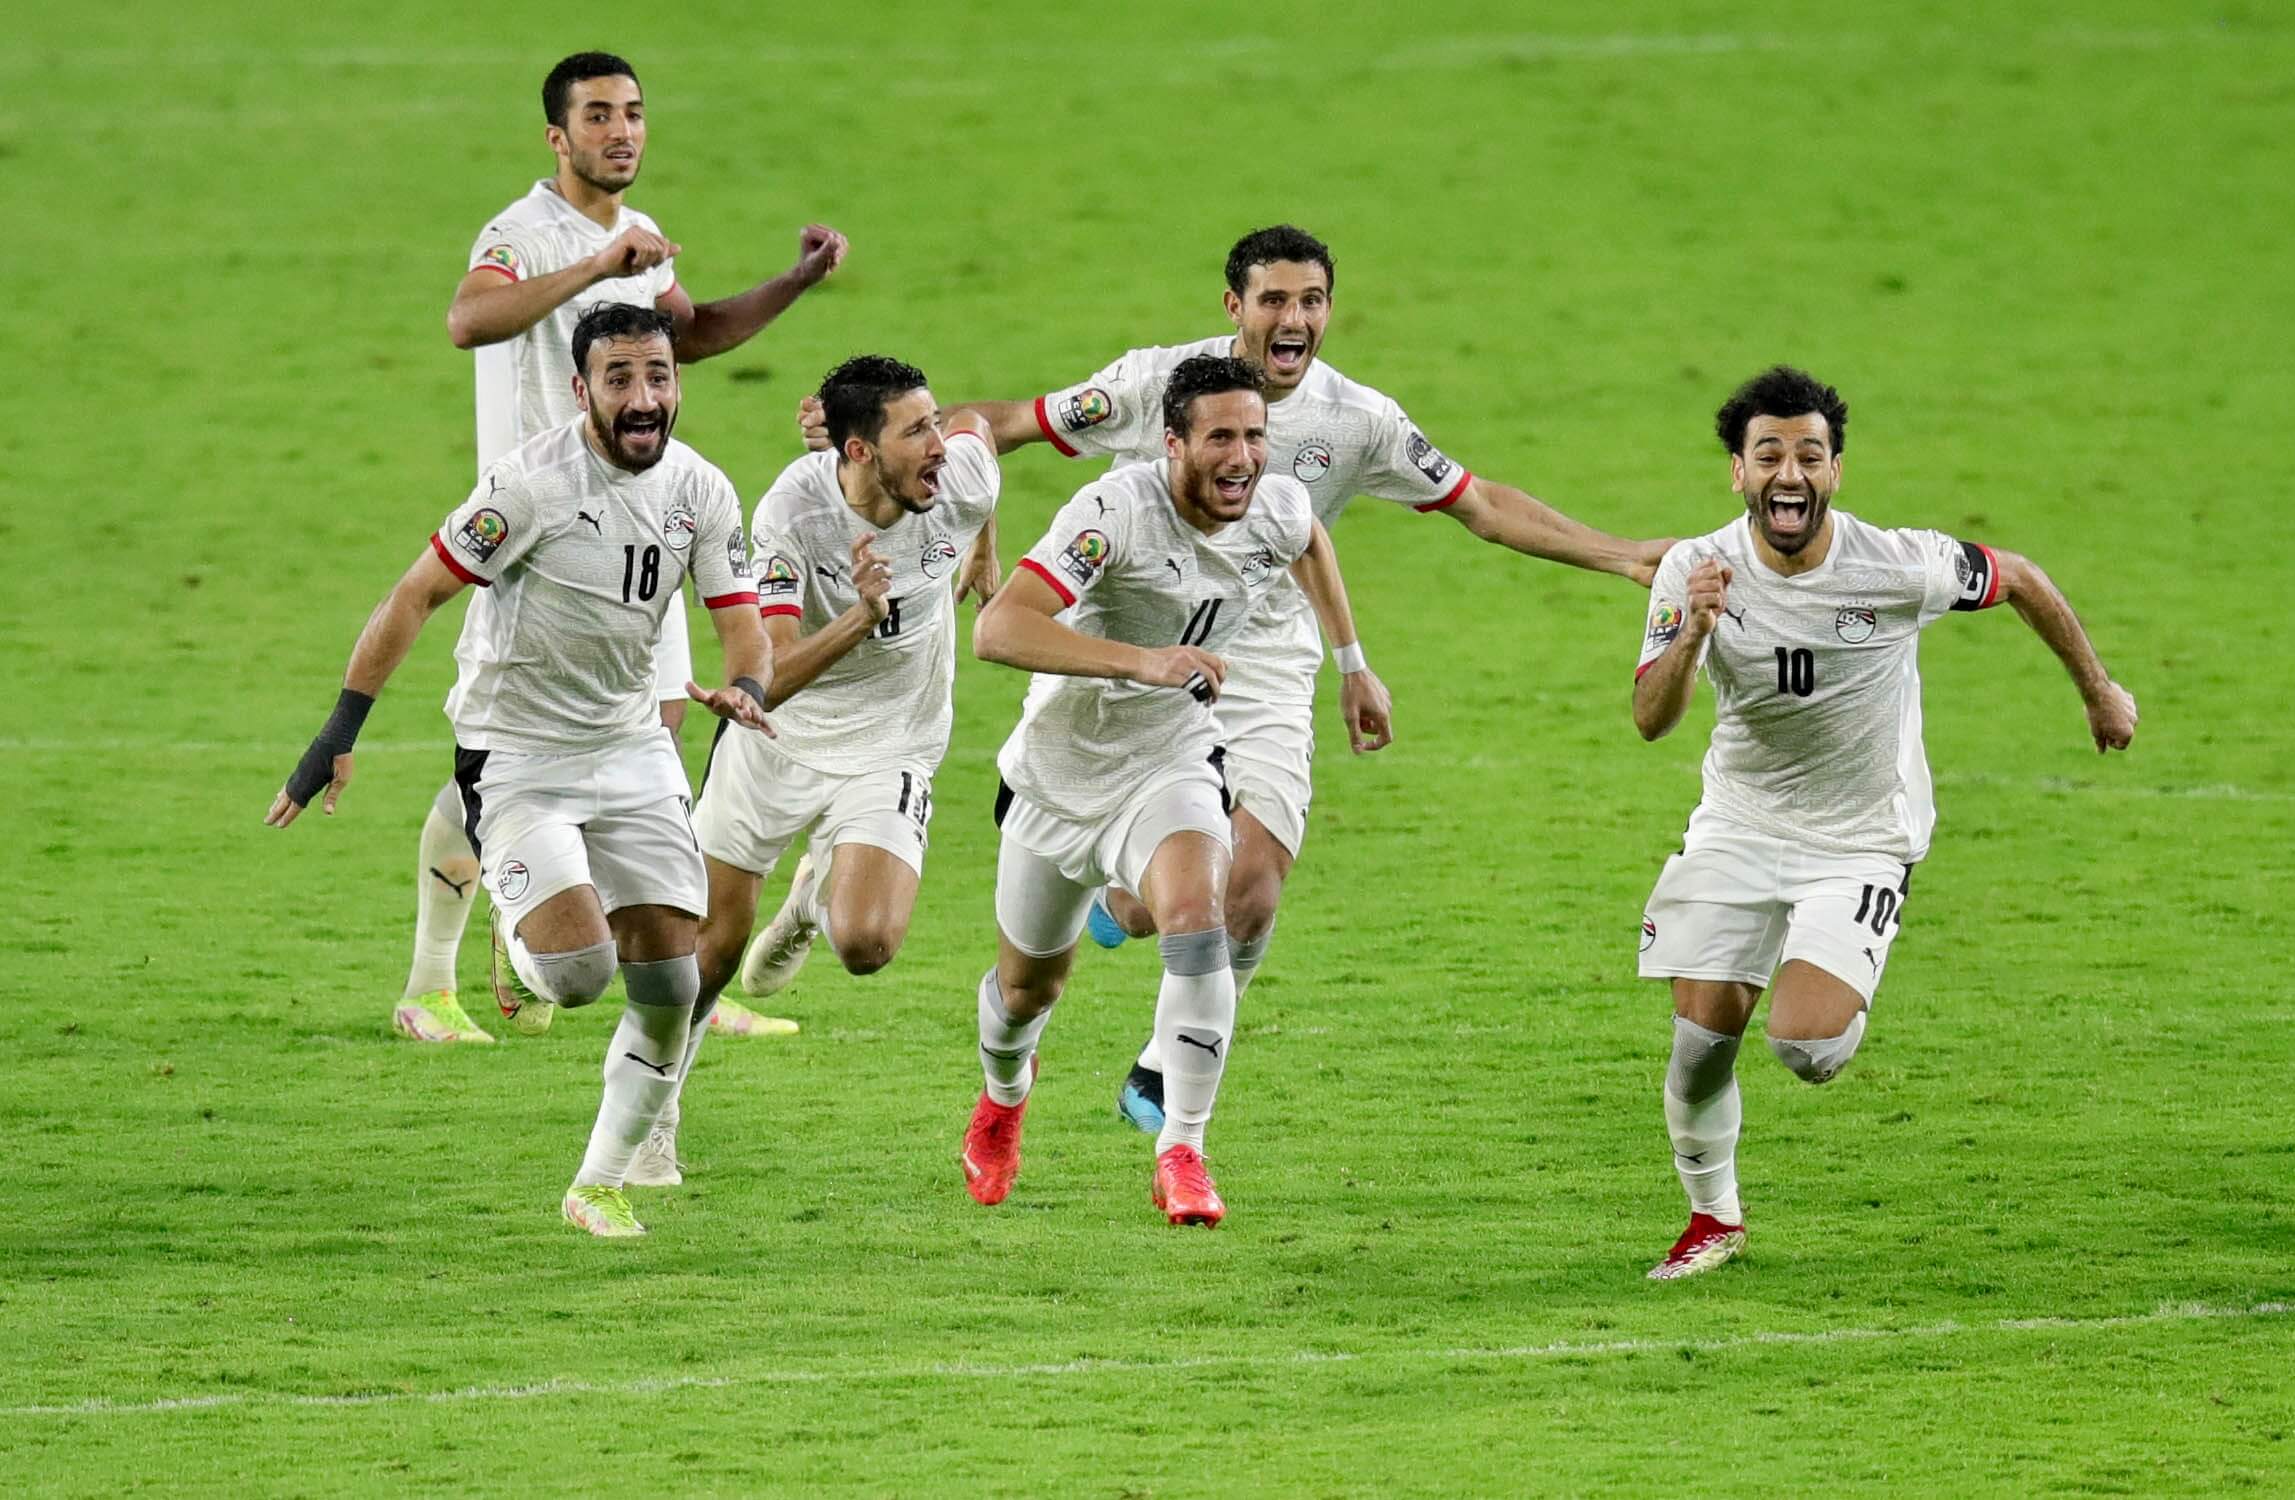 Afcon 2021: Egypt defeats hosts Cameroon on penalties to reach the Afcon Final